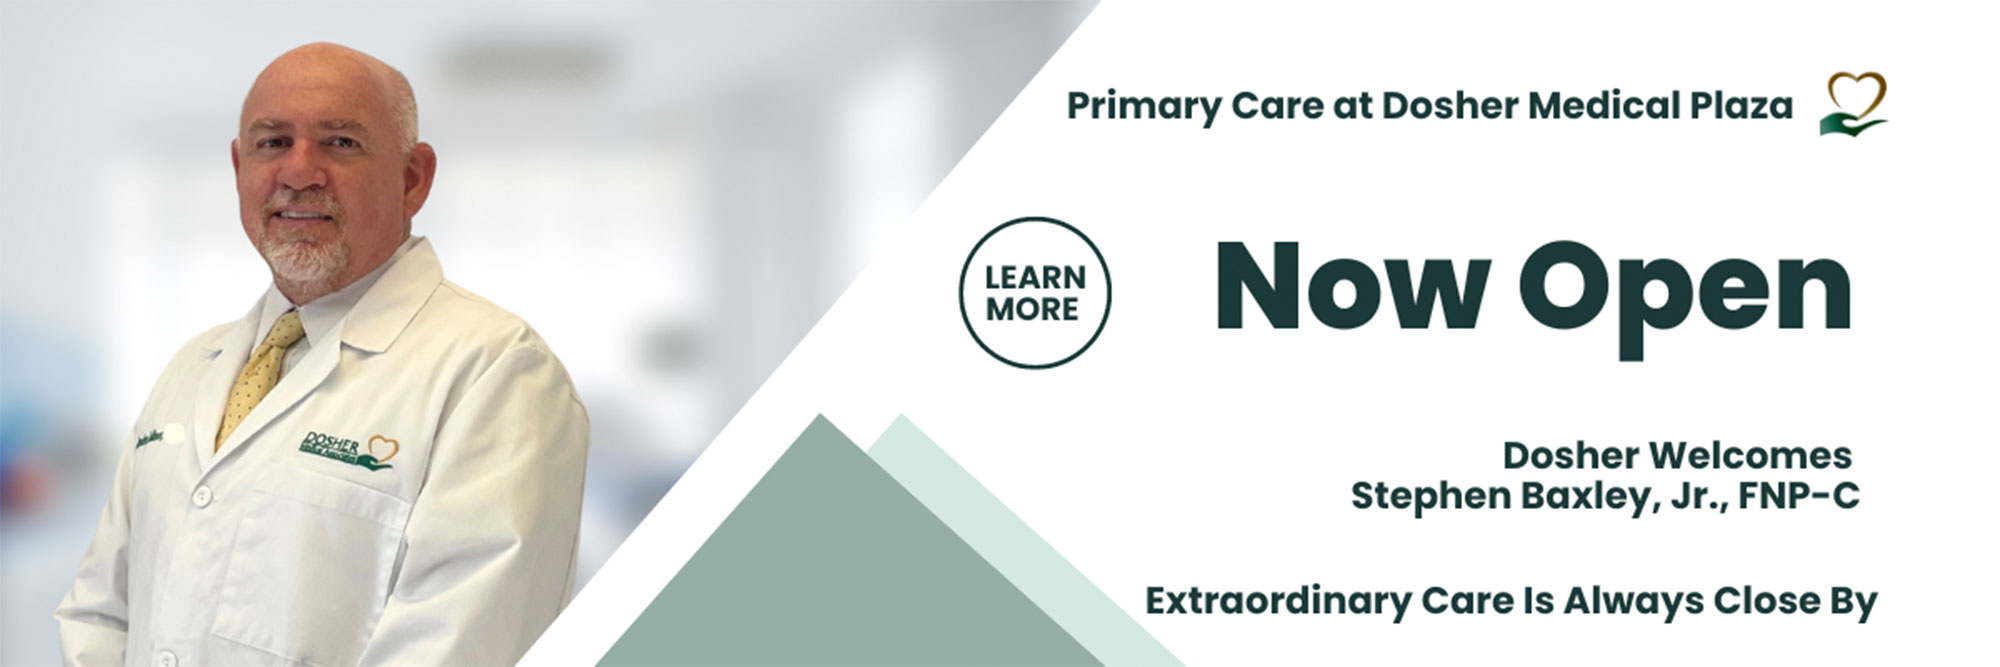 Primary Care at Dosher Medical Plaza 
Now Open
Dosher Welcomes Stephen Baxley, Jr. FNP-C
Extraordinary Care is Always Close By